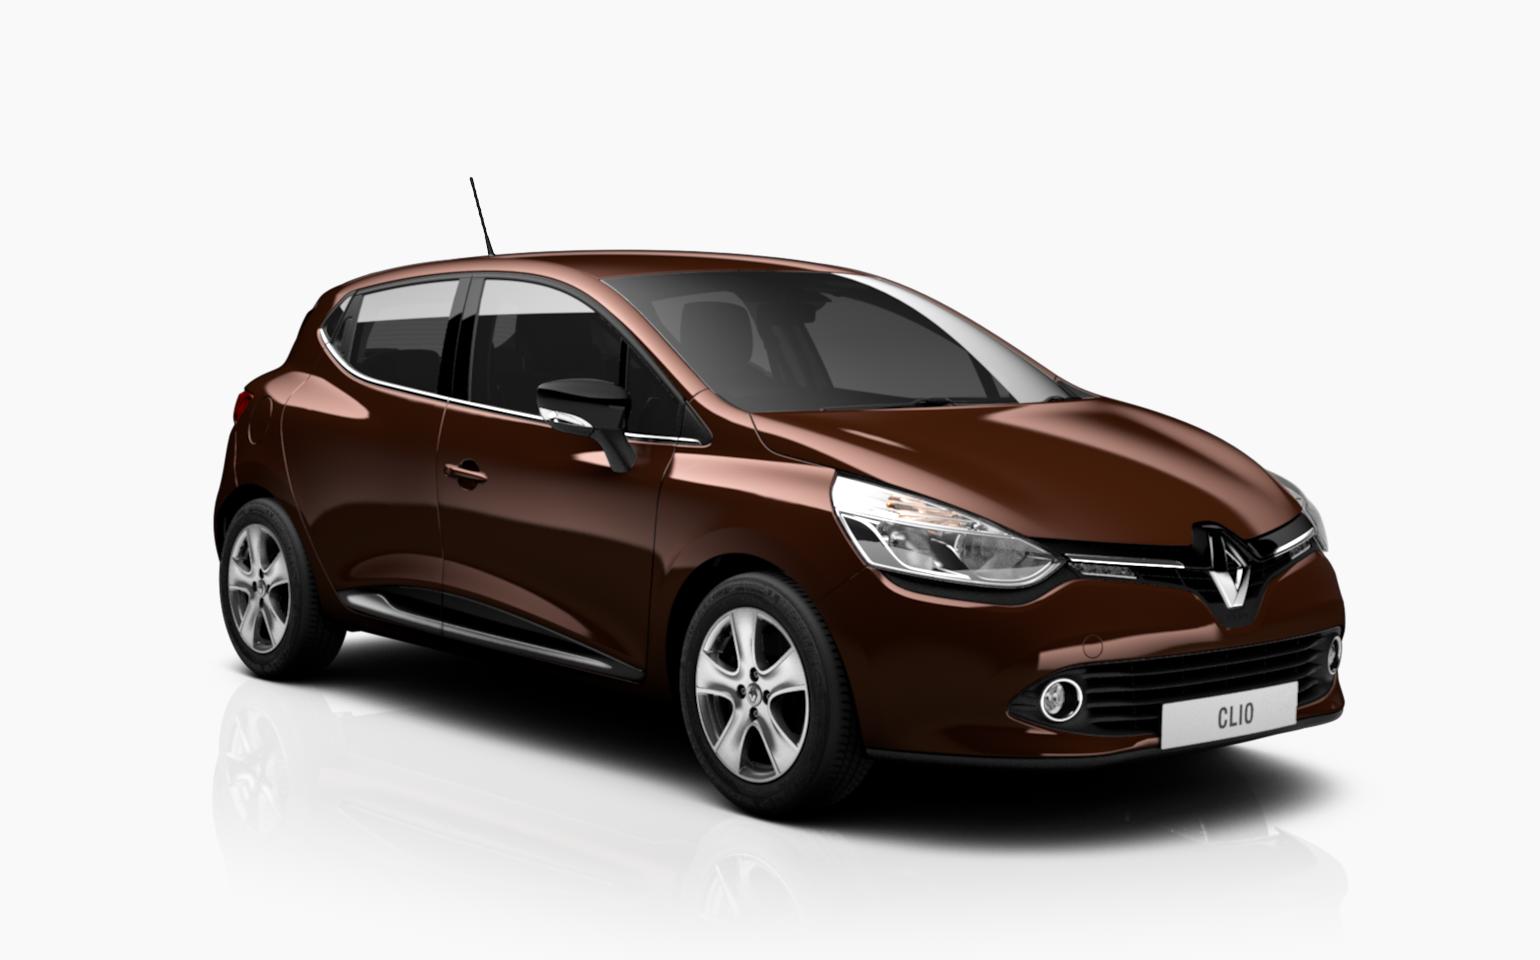 Amazing Renault Clio Pictures & Backgrounds